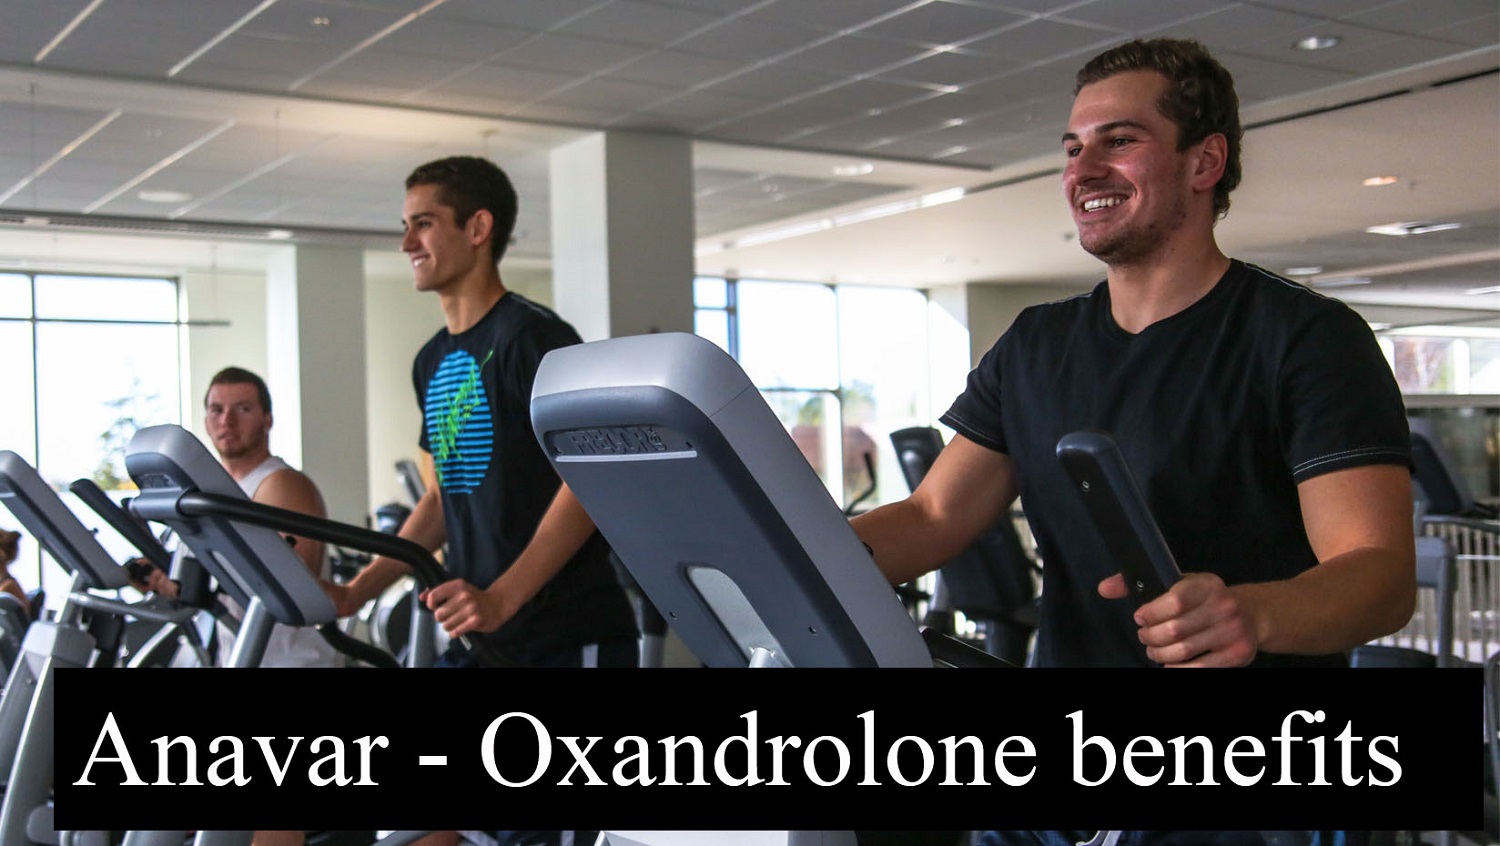 Anavar Oxandrolone benefits for everyone